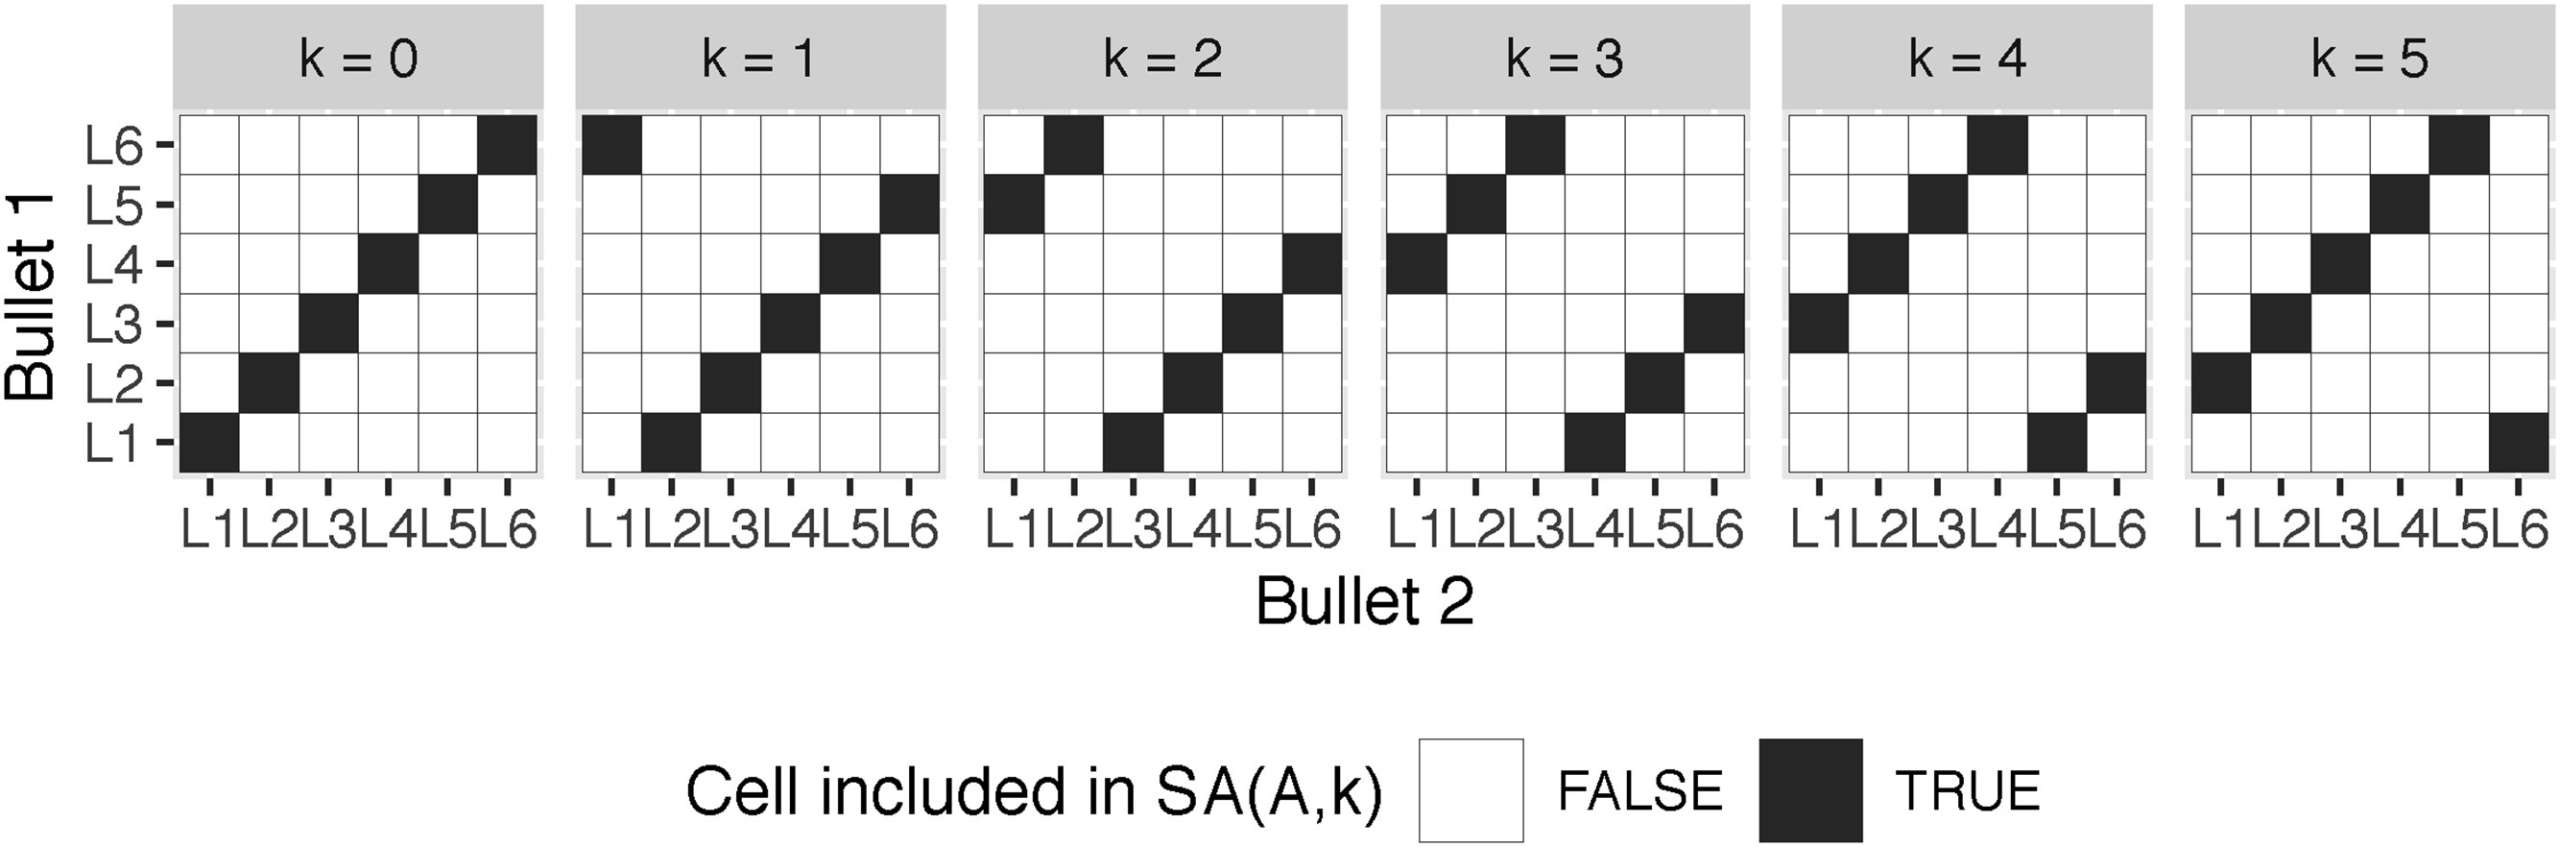 comparison-of-three-similarity-scores-for-bullet-lea-matching_3